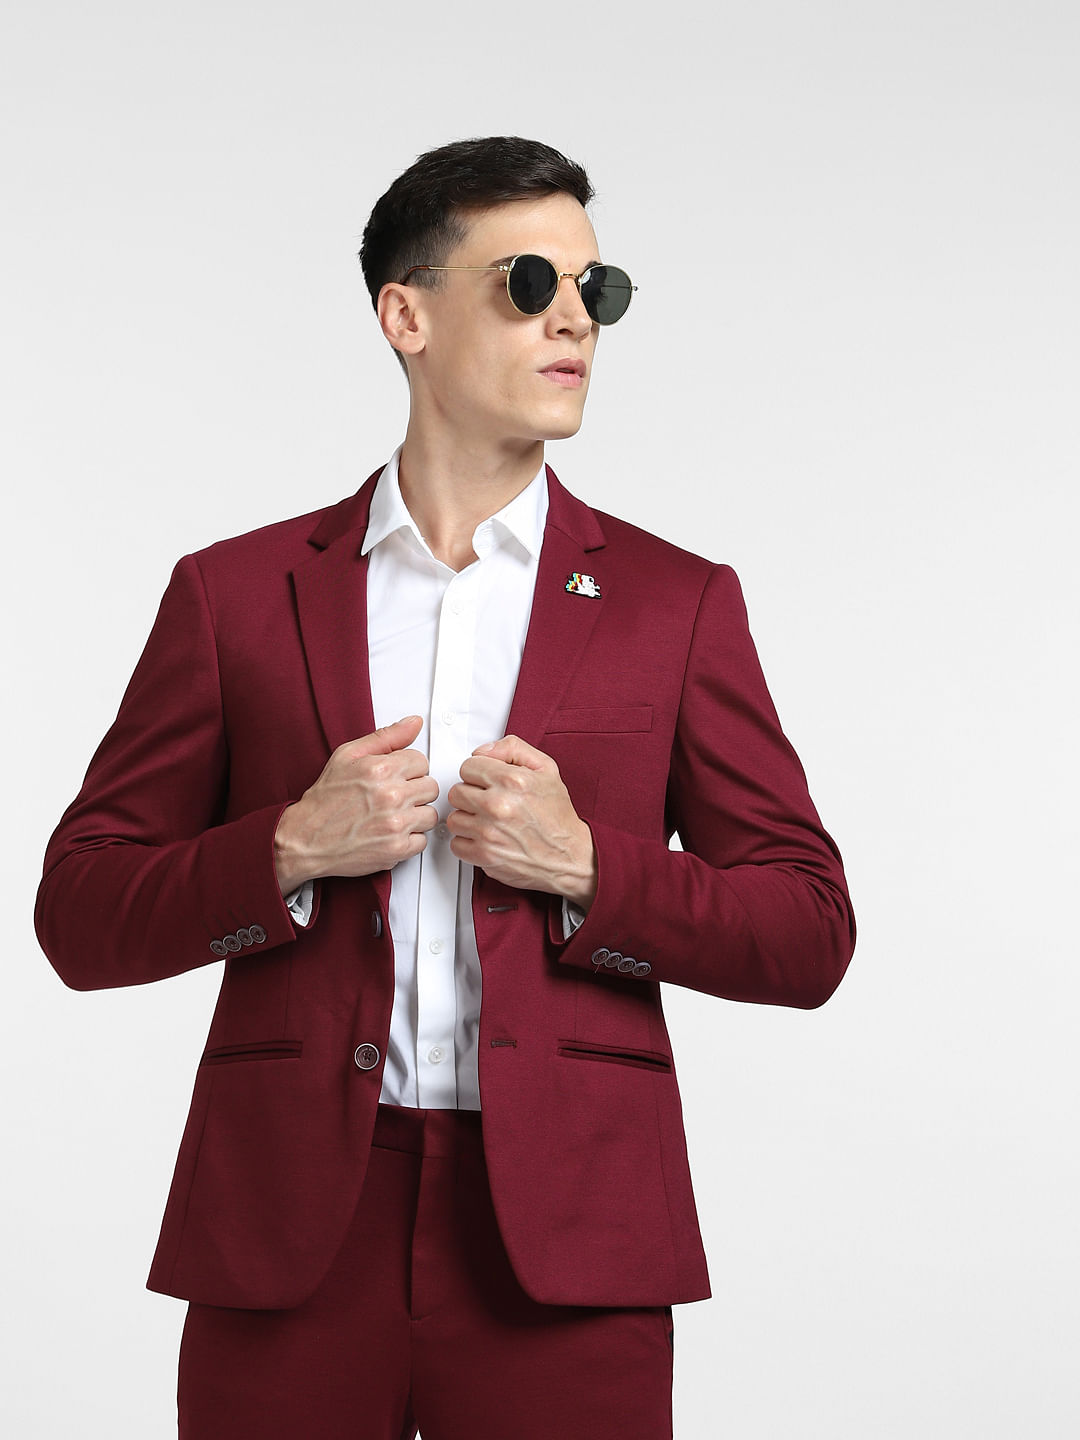 Custom Burgundy Wine Red Prom Suit For Party Prom Jacket And Pants Set With  Notched Lapel Perfect For Grooms Wedding And Tuxedos From Werbowy, $88.68 |  DHgate.Com